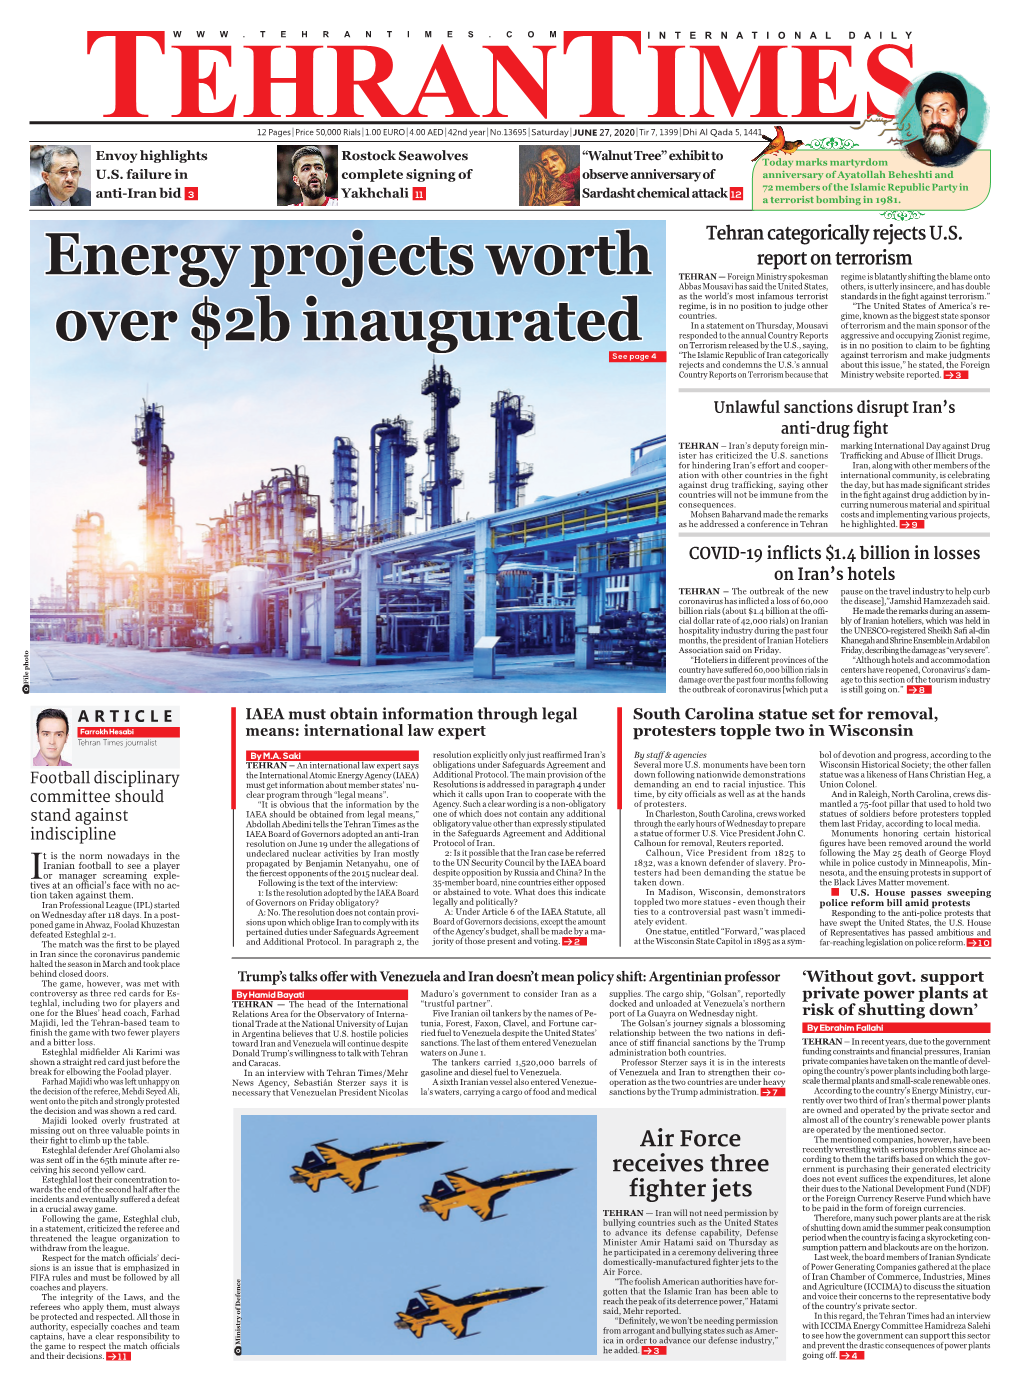 Energy Projects Worth Over $2B Inaugurated